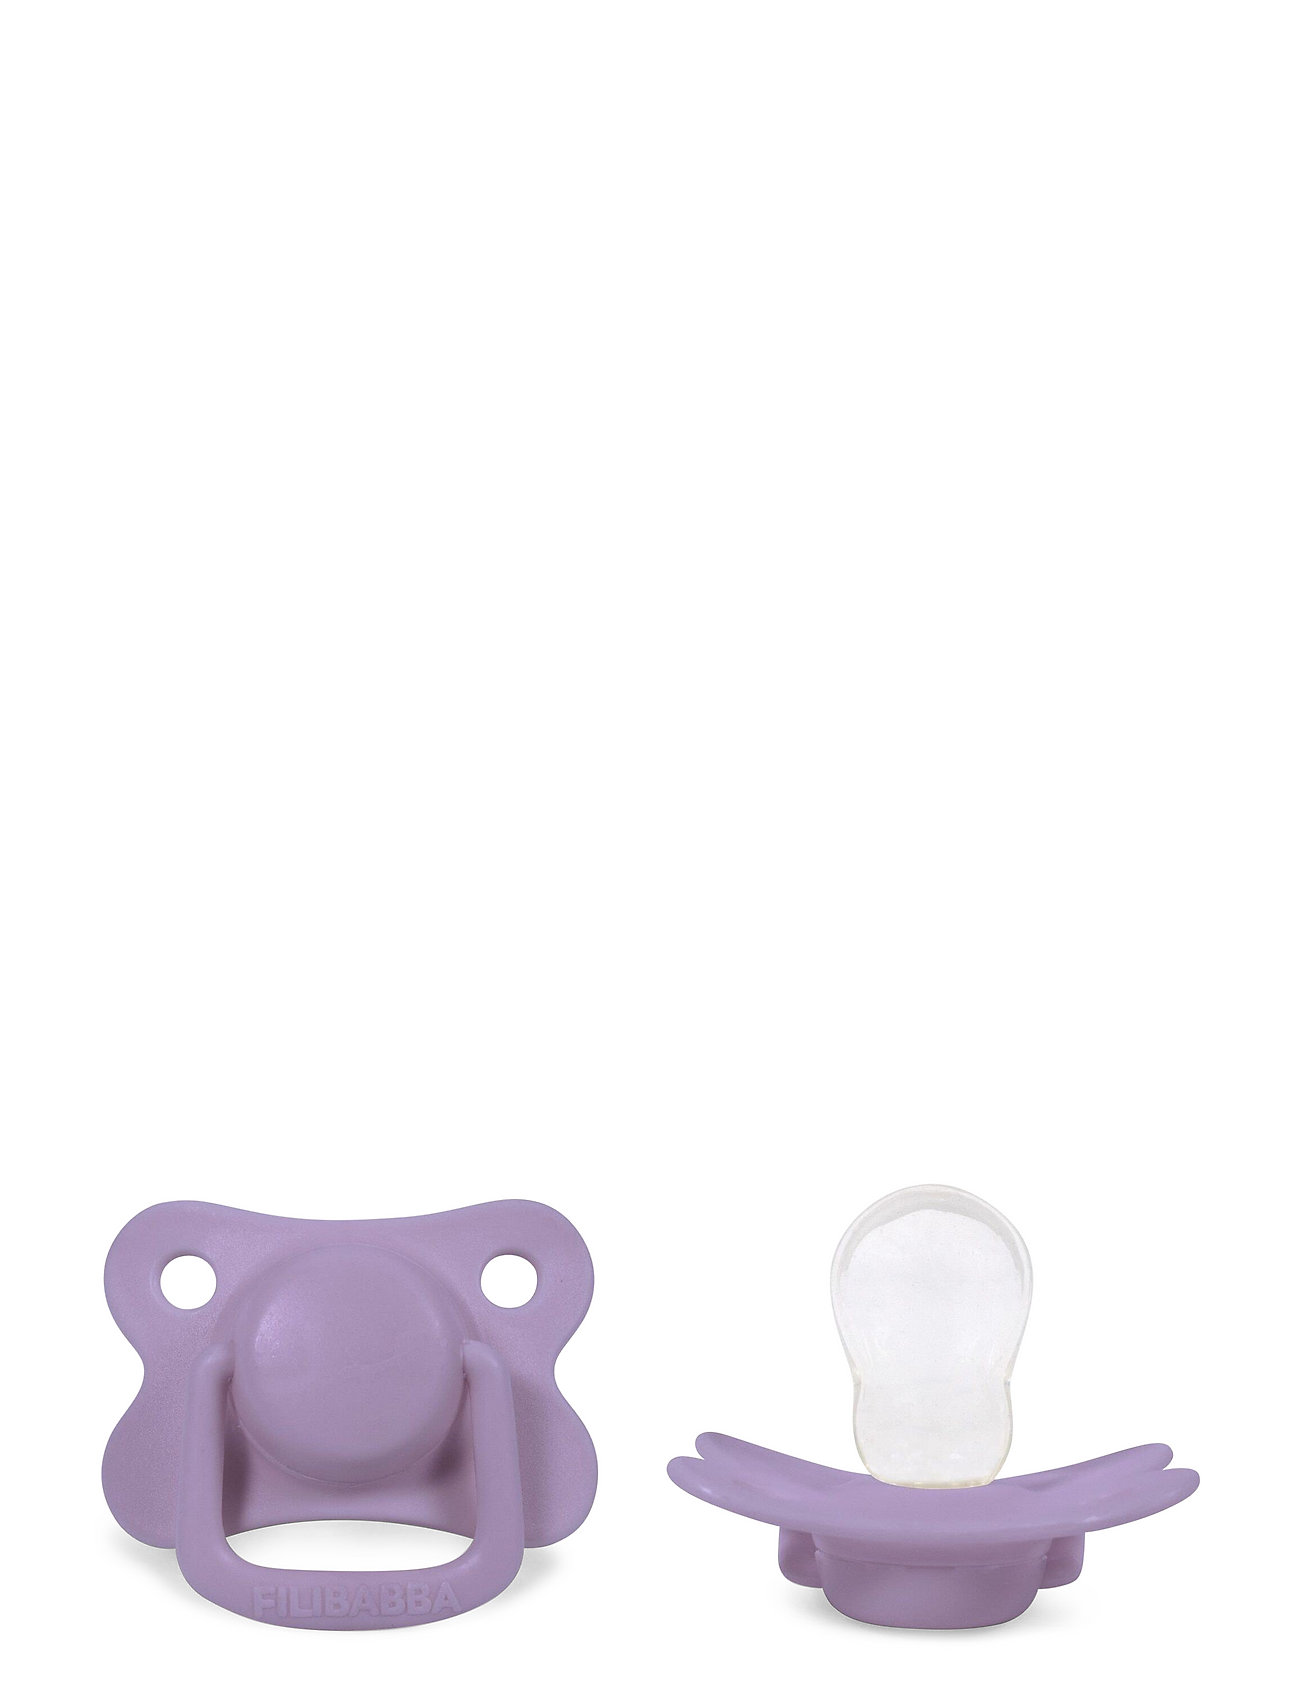 2-Pack Pacifiers - Fresh Violet +6 Months Baby & Maternity Pacifiers & Accessories Pacifiers Purple Filibabba